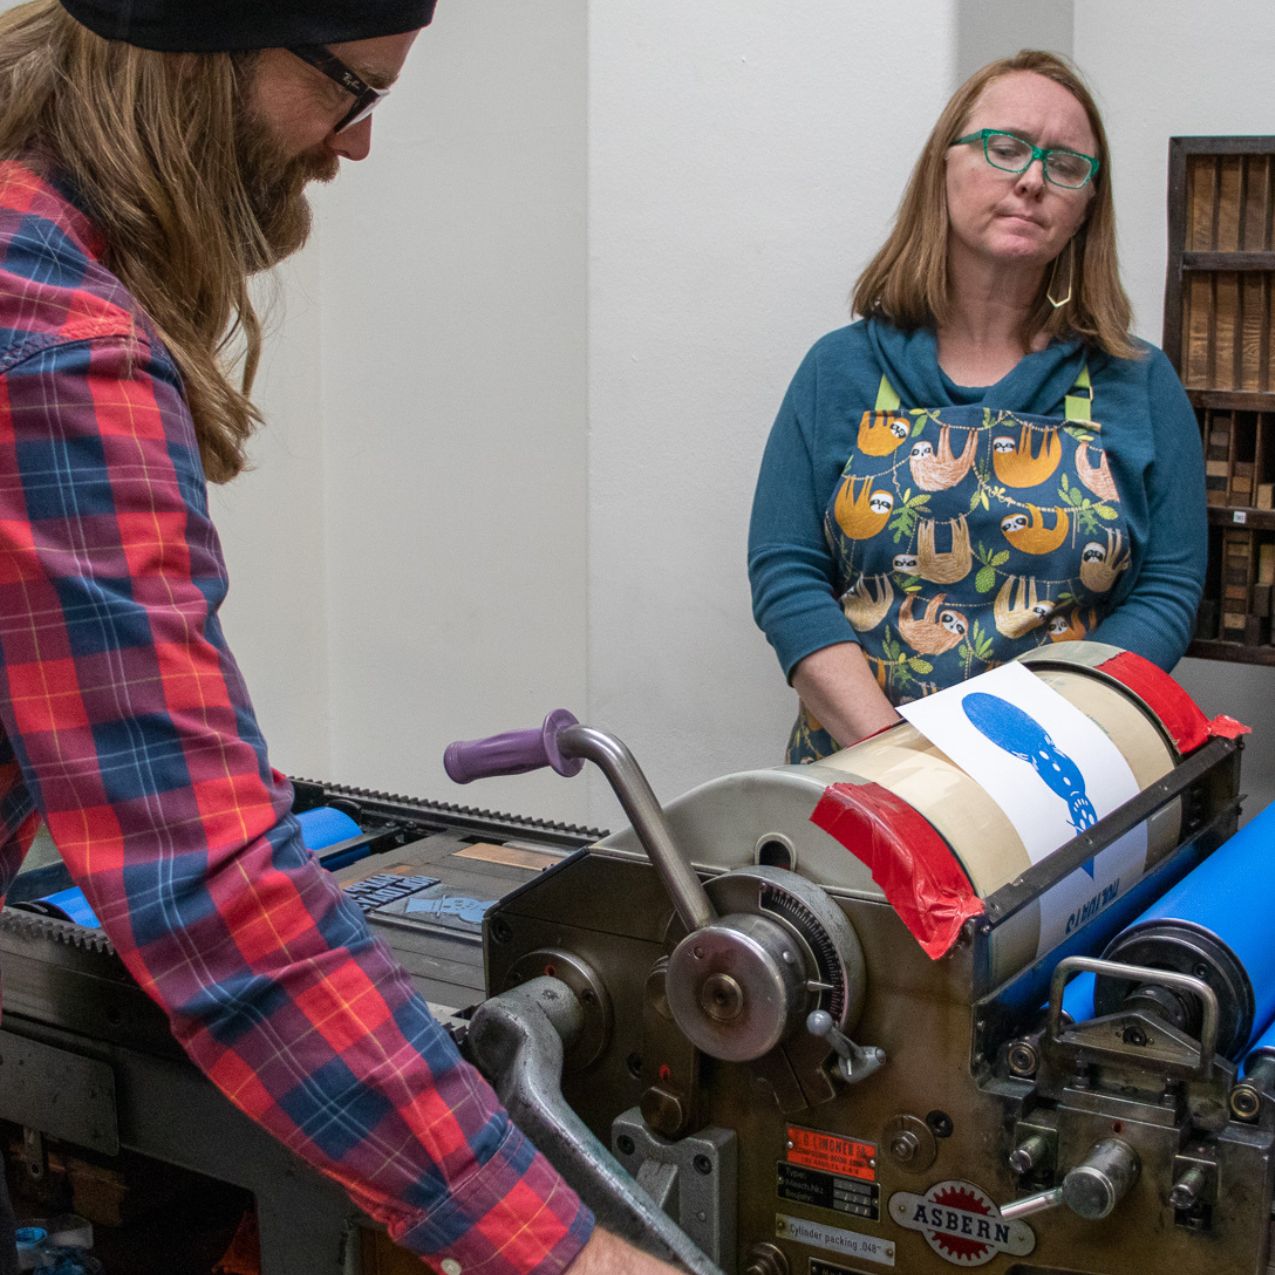 Art faculty member Naomi Velasquez looks on while a student tries working the Pinyon J. Printing Press. He is spinning the handle while the paper is printed with a blue ink. Naomi is wearing an apron.